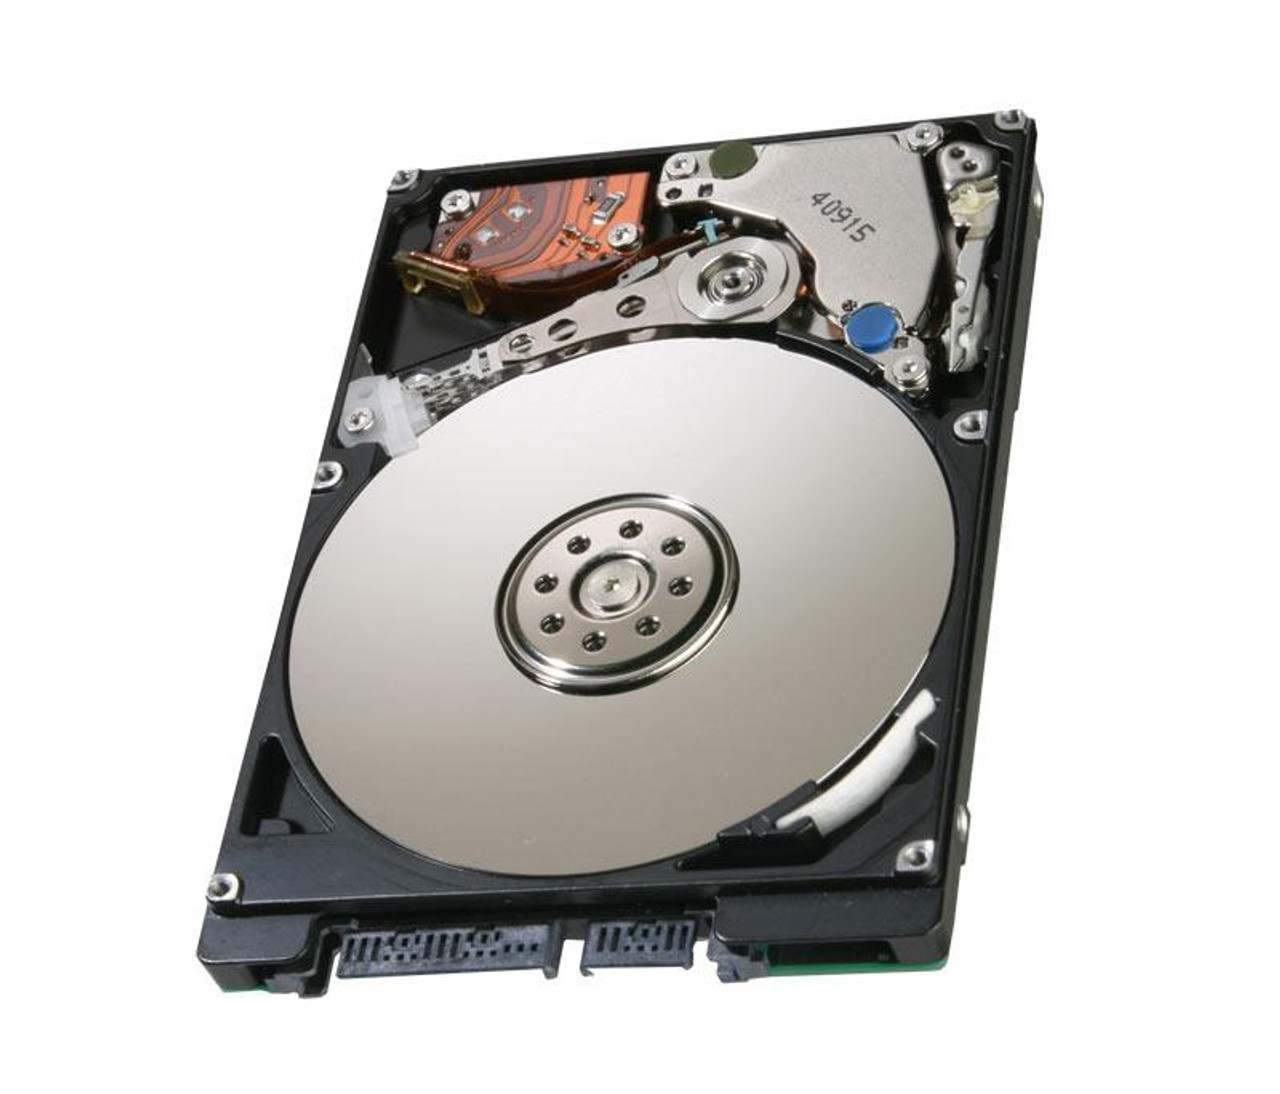 655708B21S HP 500GB 7200RPM SATA 6Gbps Midline Hot Swap 2.5-inch Internal Hard Drive with Smart Carrier